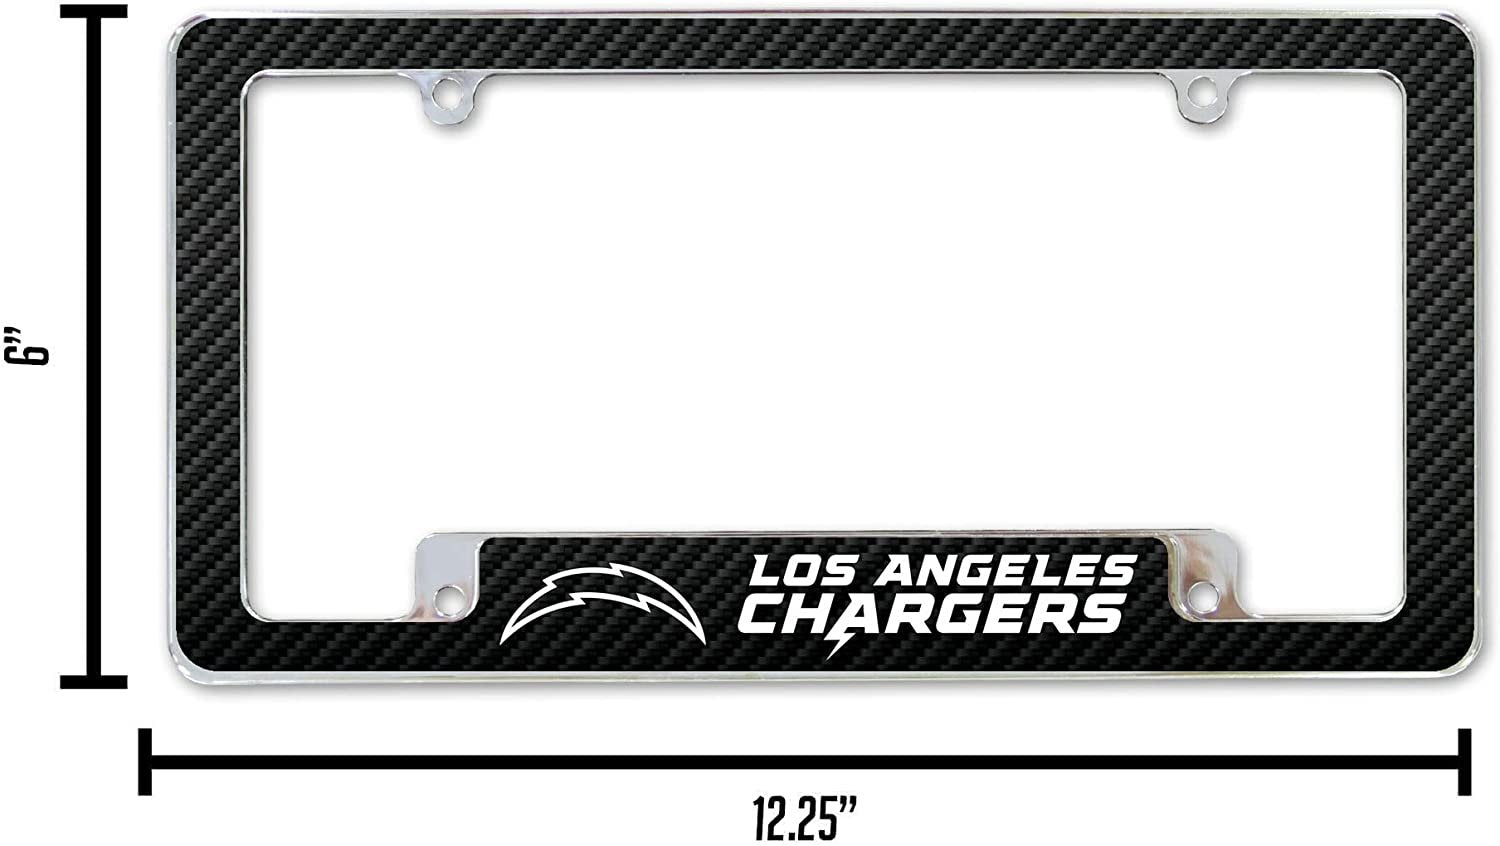 Los Angeles Chargers Metal License Plate Frame Chrome Tag Cover Carbon Fiber Design 6x12 Inch